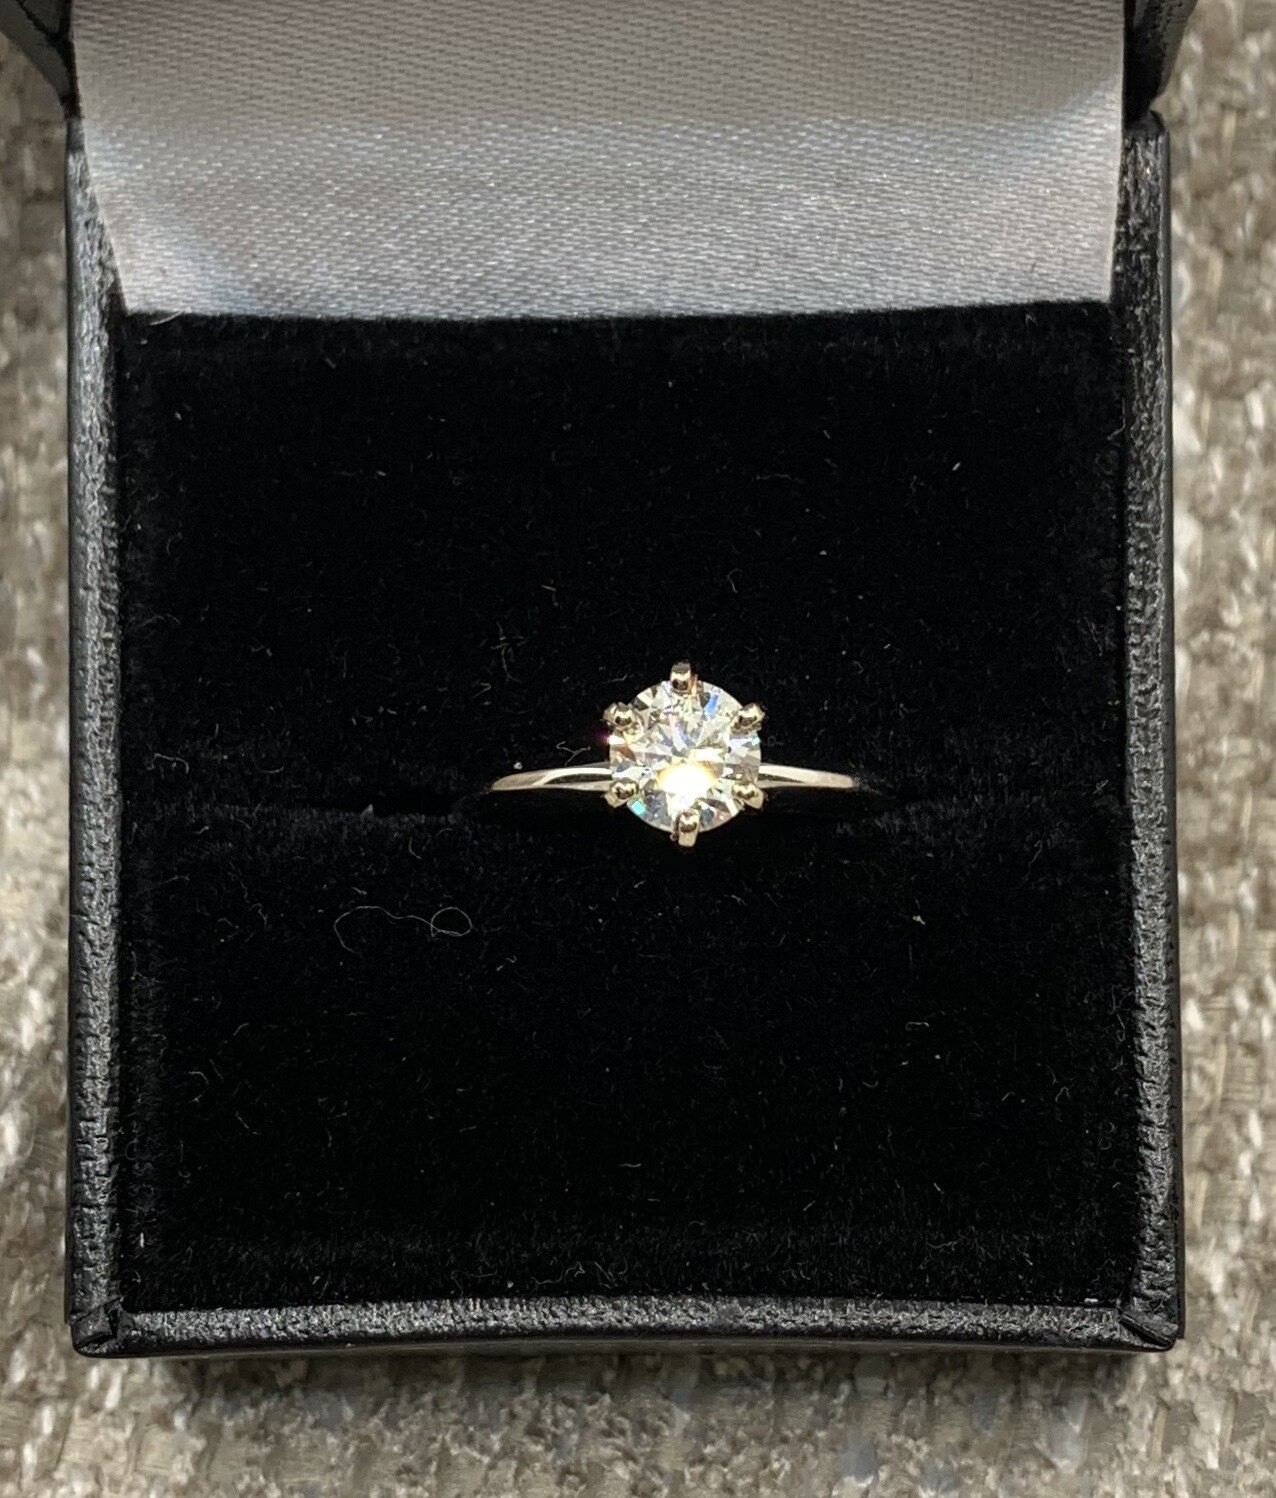 Diamond Engagement Ring (Brilliant Cut ) 75 Pts. Solitaire in a 14Kt. White Gold Setting.